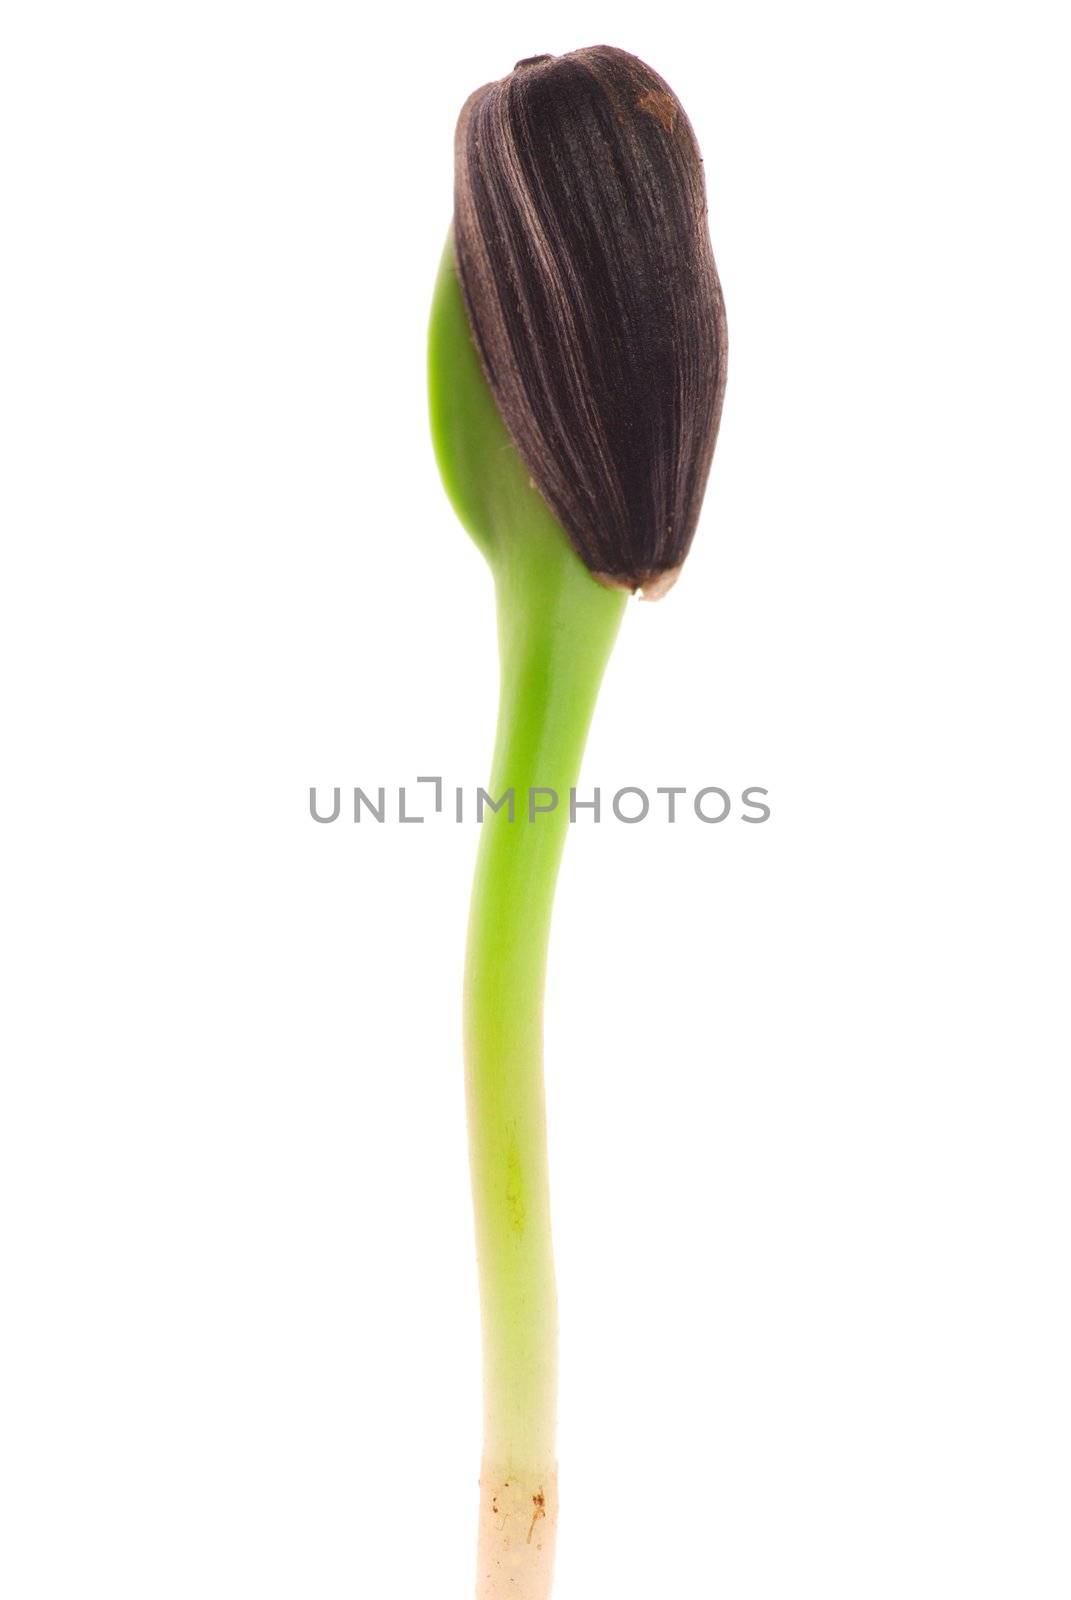 Sunflower sprout close-up isolated on white background                                    